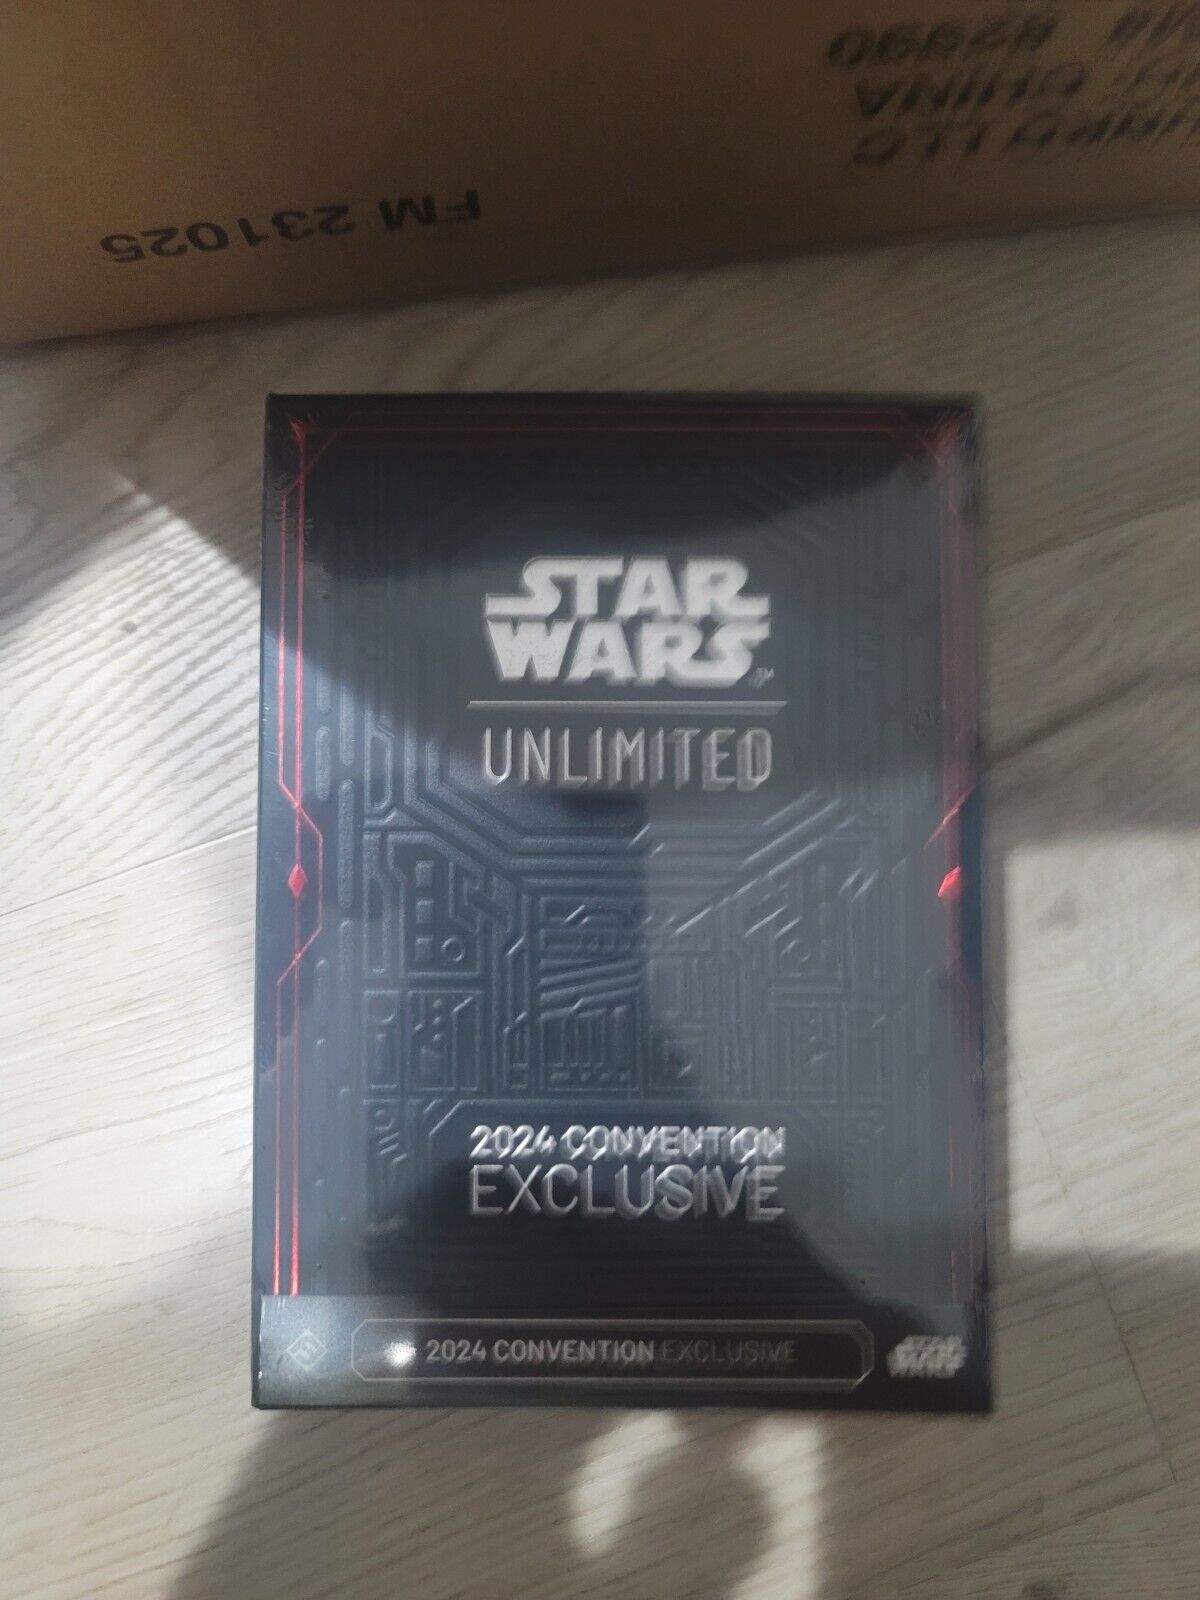 STAR WARS UNLIMITED SDCC 2024 Convention Exclusive Limited Edition IN HAND SEALE